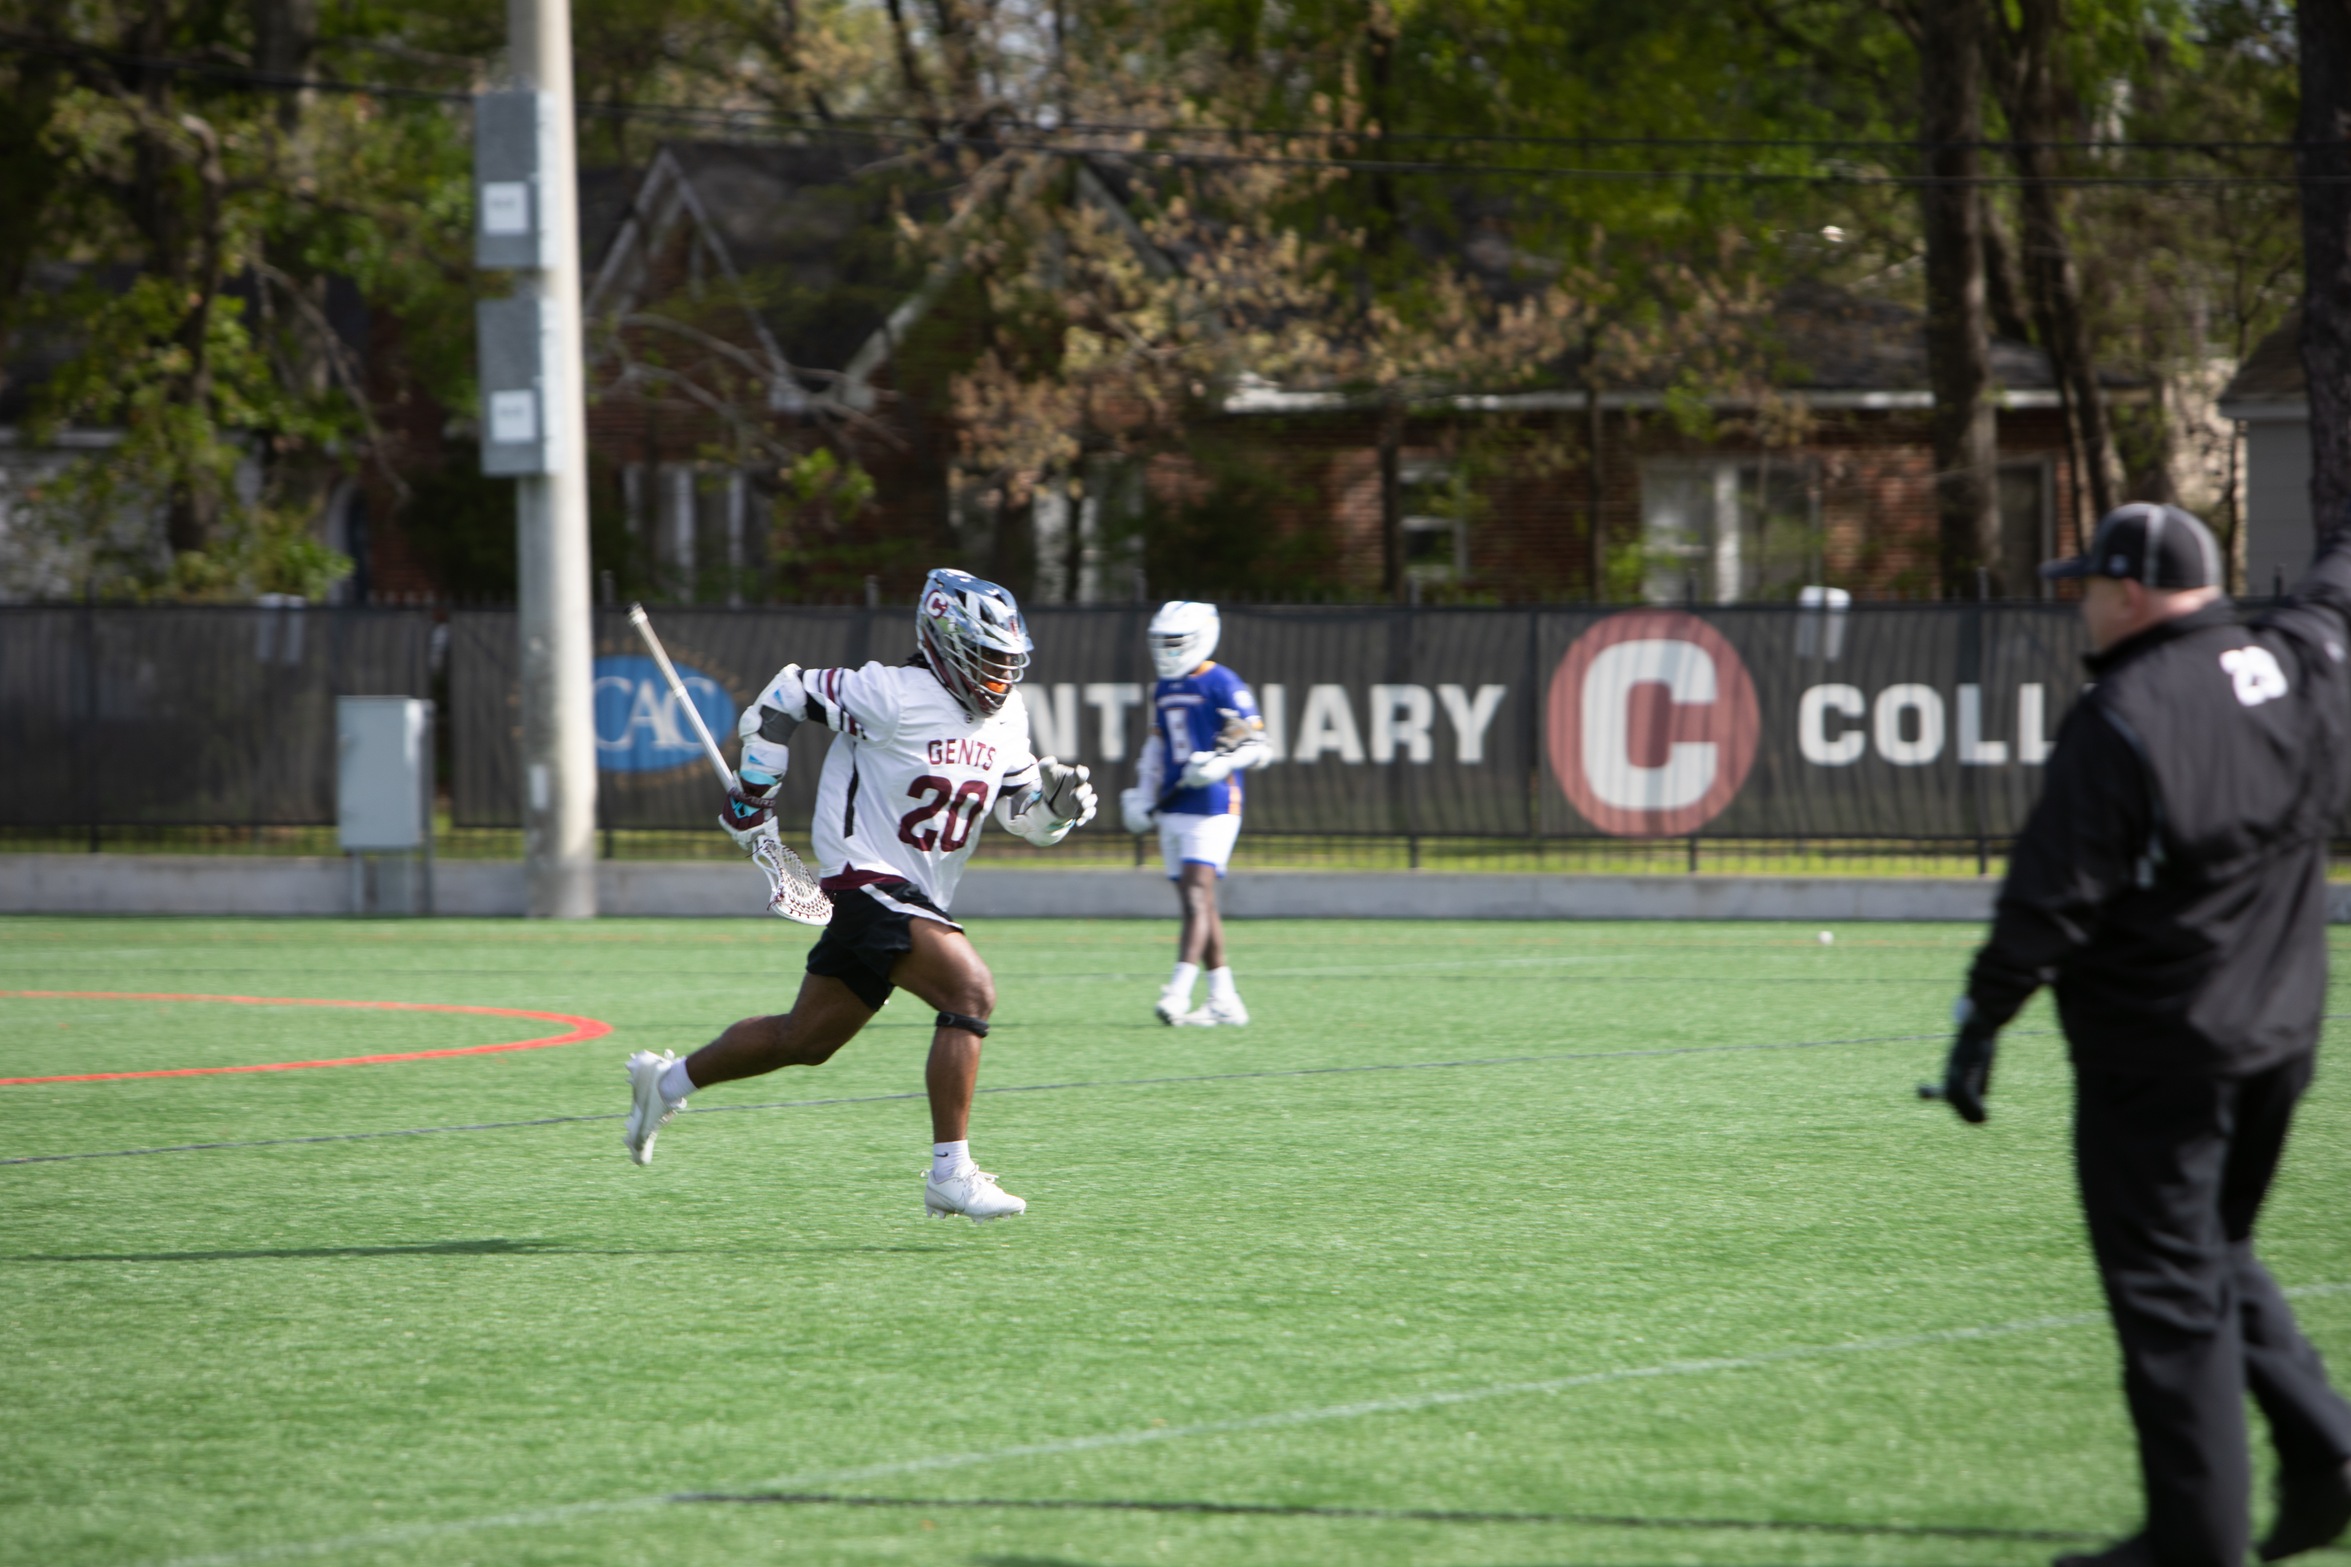 Senior A/MF Mark Temple and the Gents face Colorado College on Sunday in their season finale.